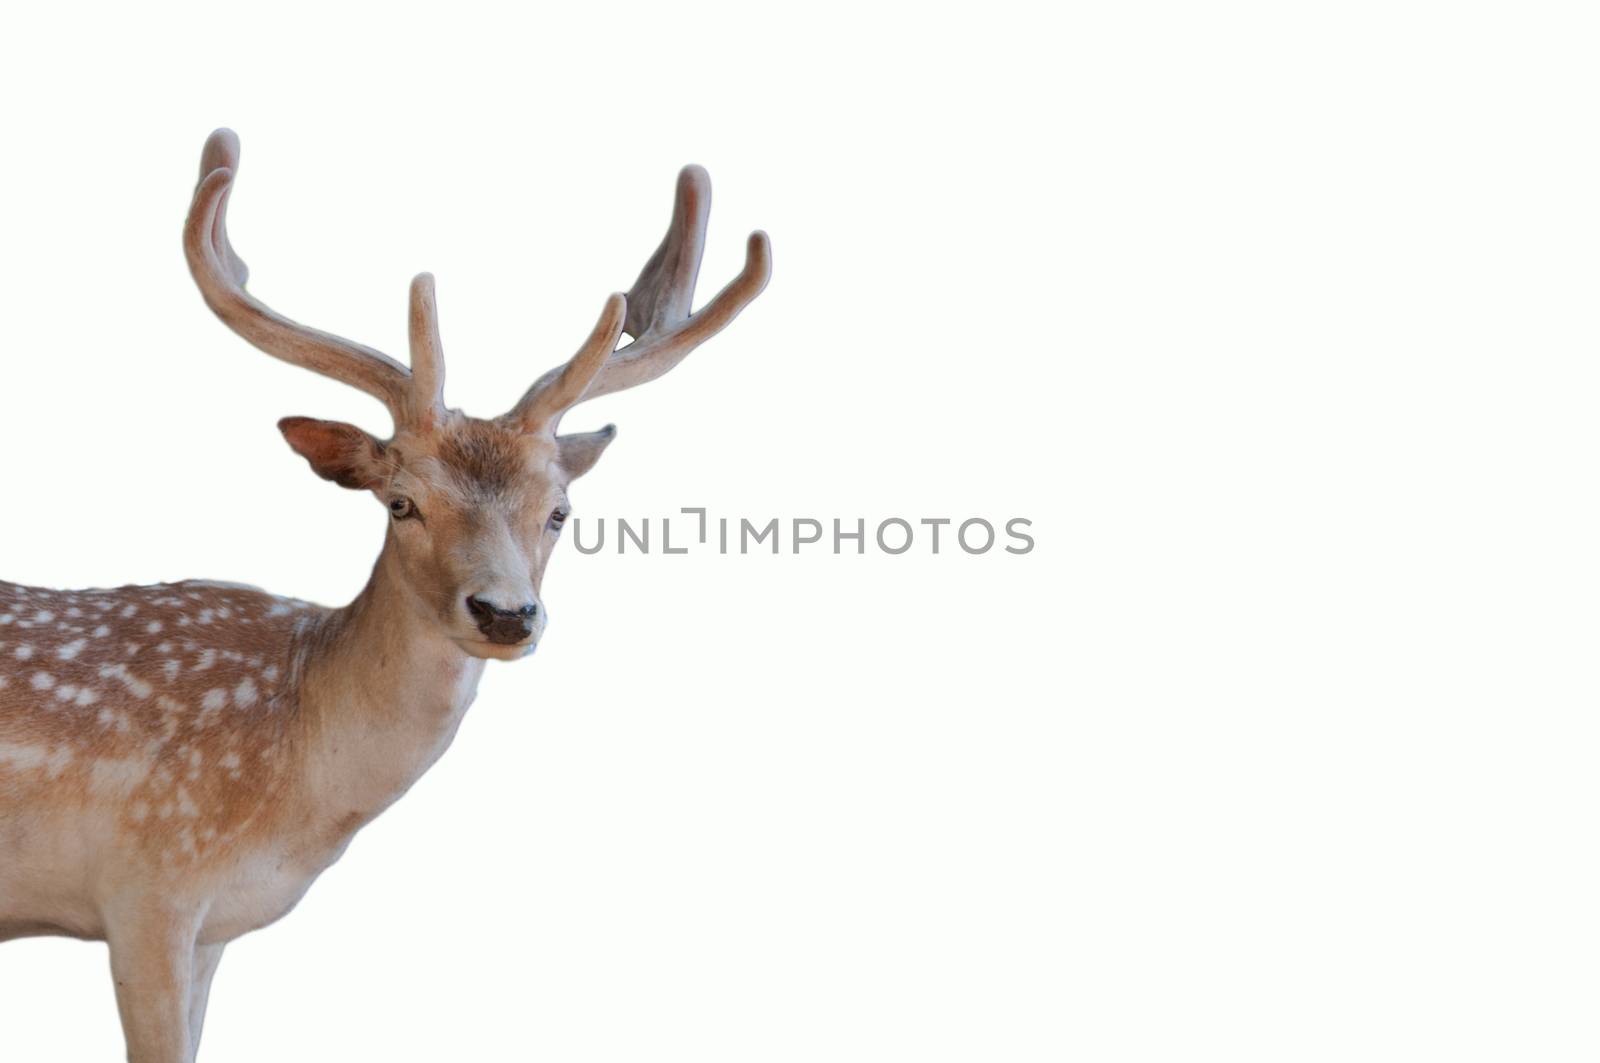 Wildlife christmas animal portrait of a deer head with antlers isolated on a white background